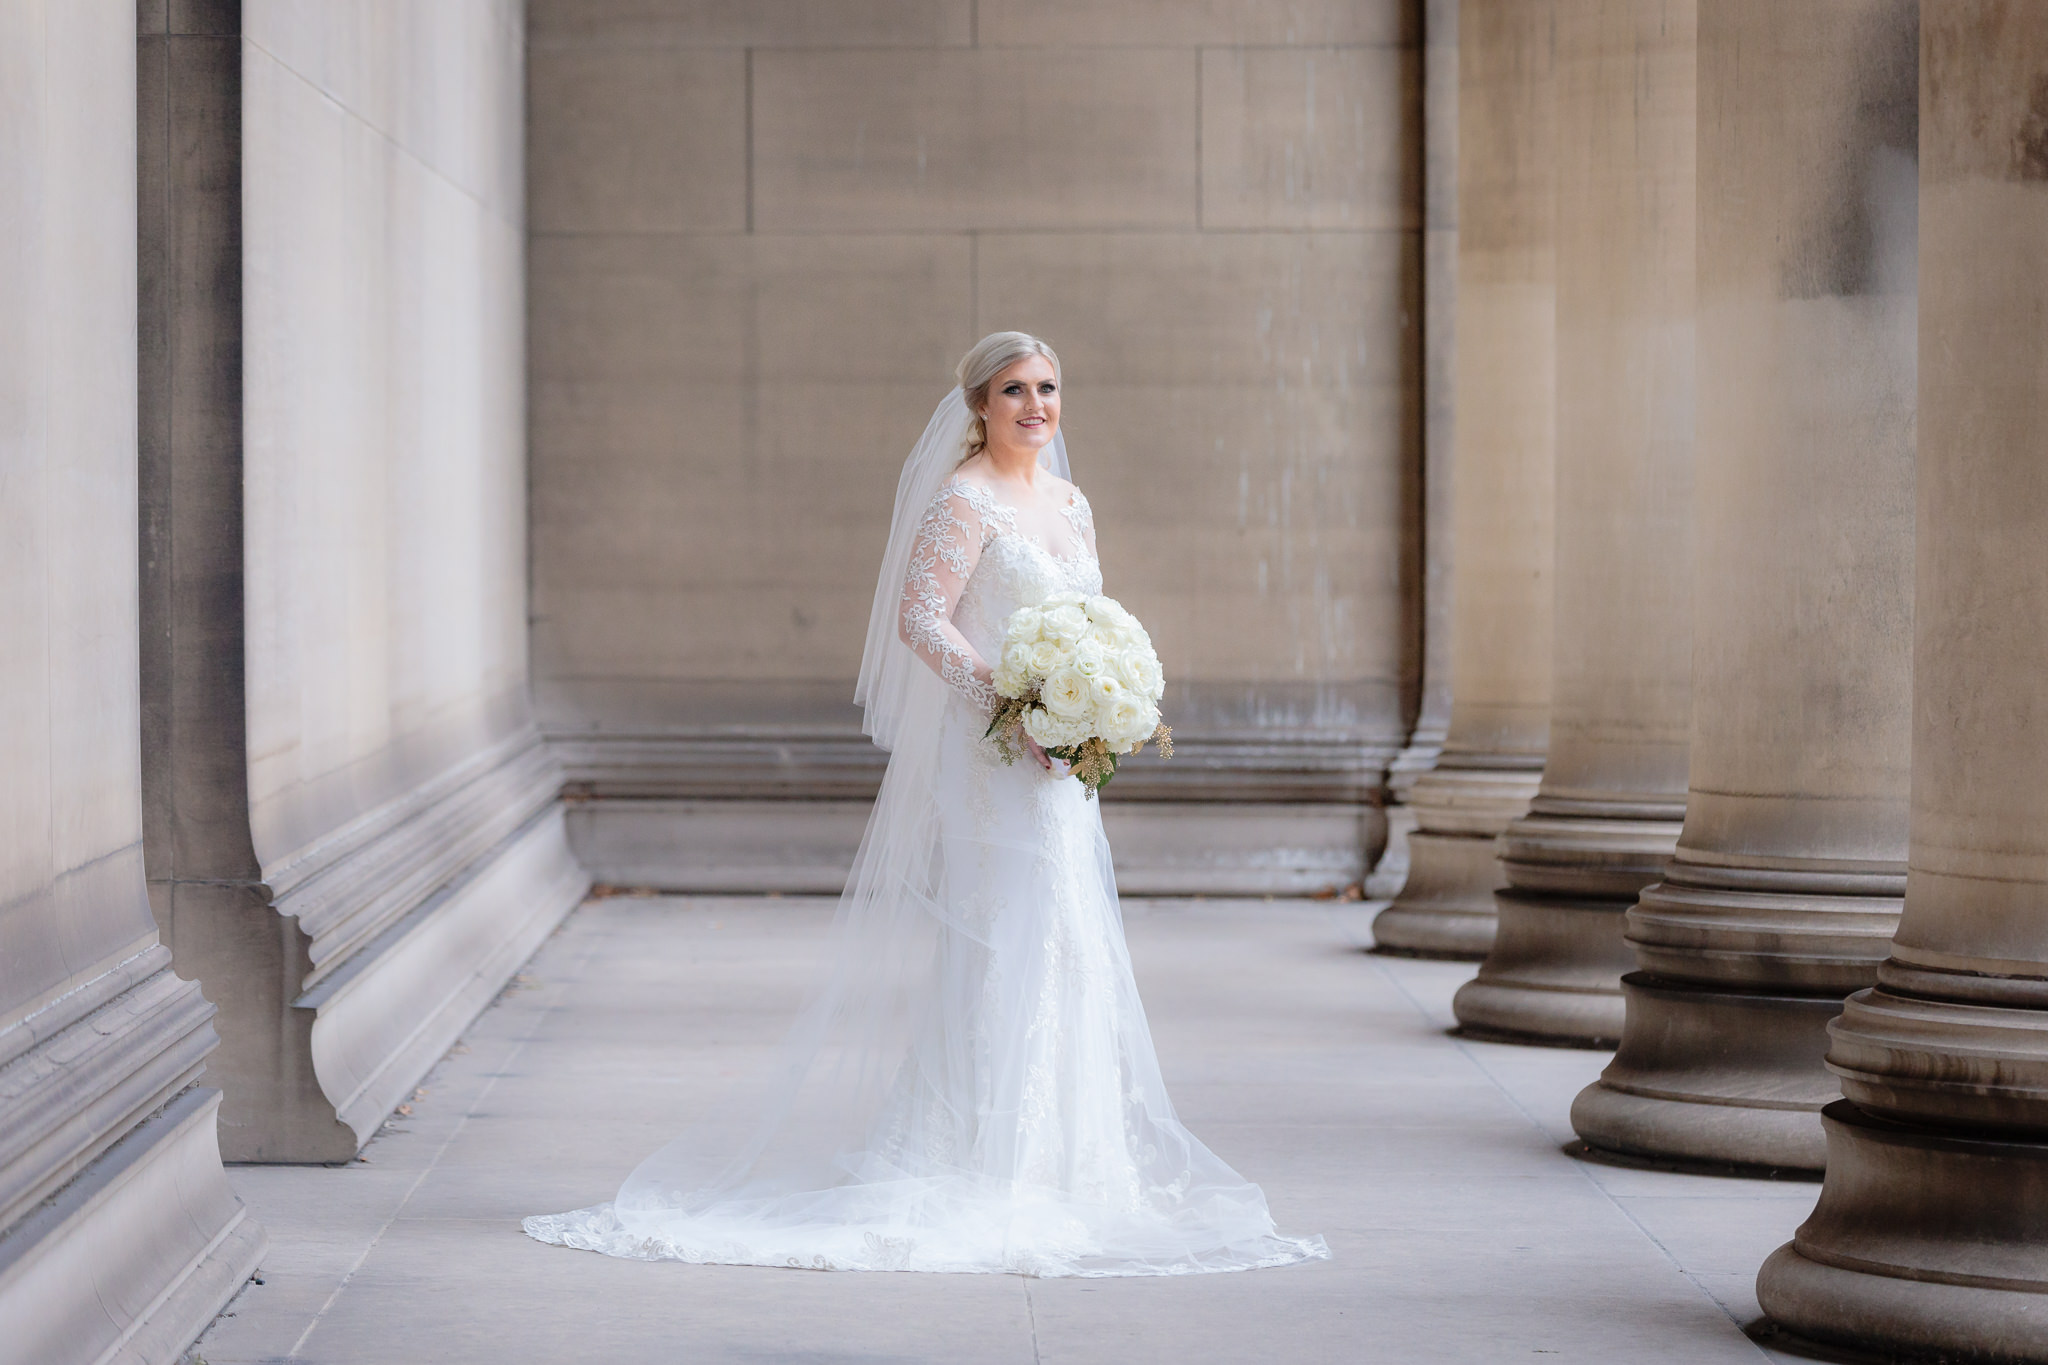 Bridal portrait at CMU columns with a Sottero & Midgley dress from Sorelle Bridal and bouquet by Hearts & Flowers